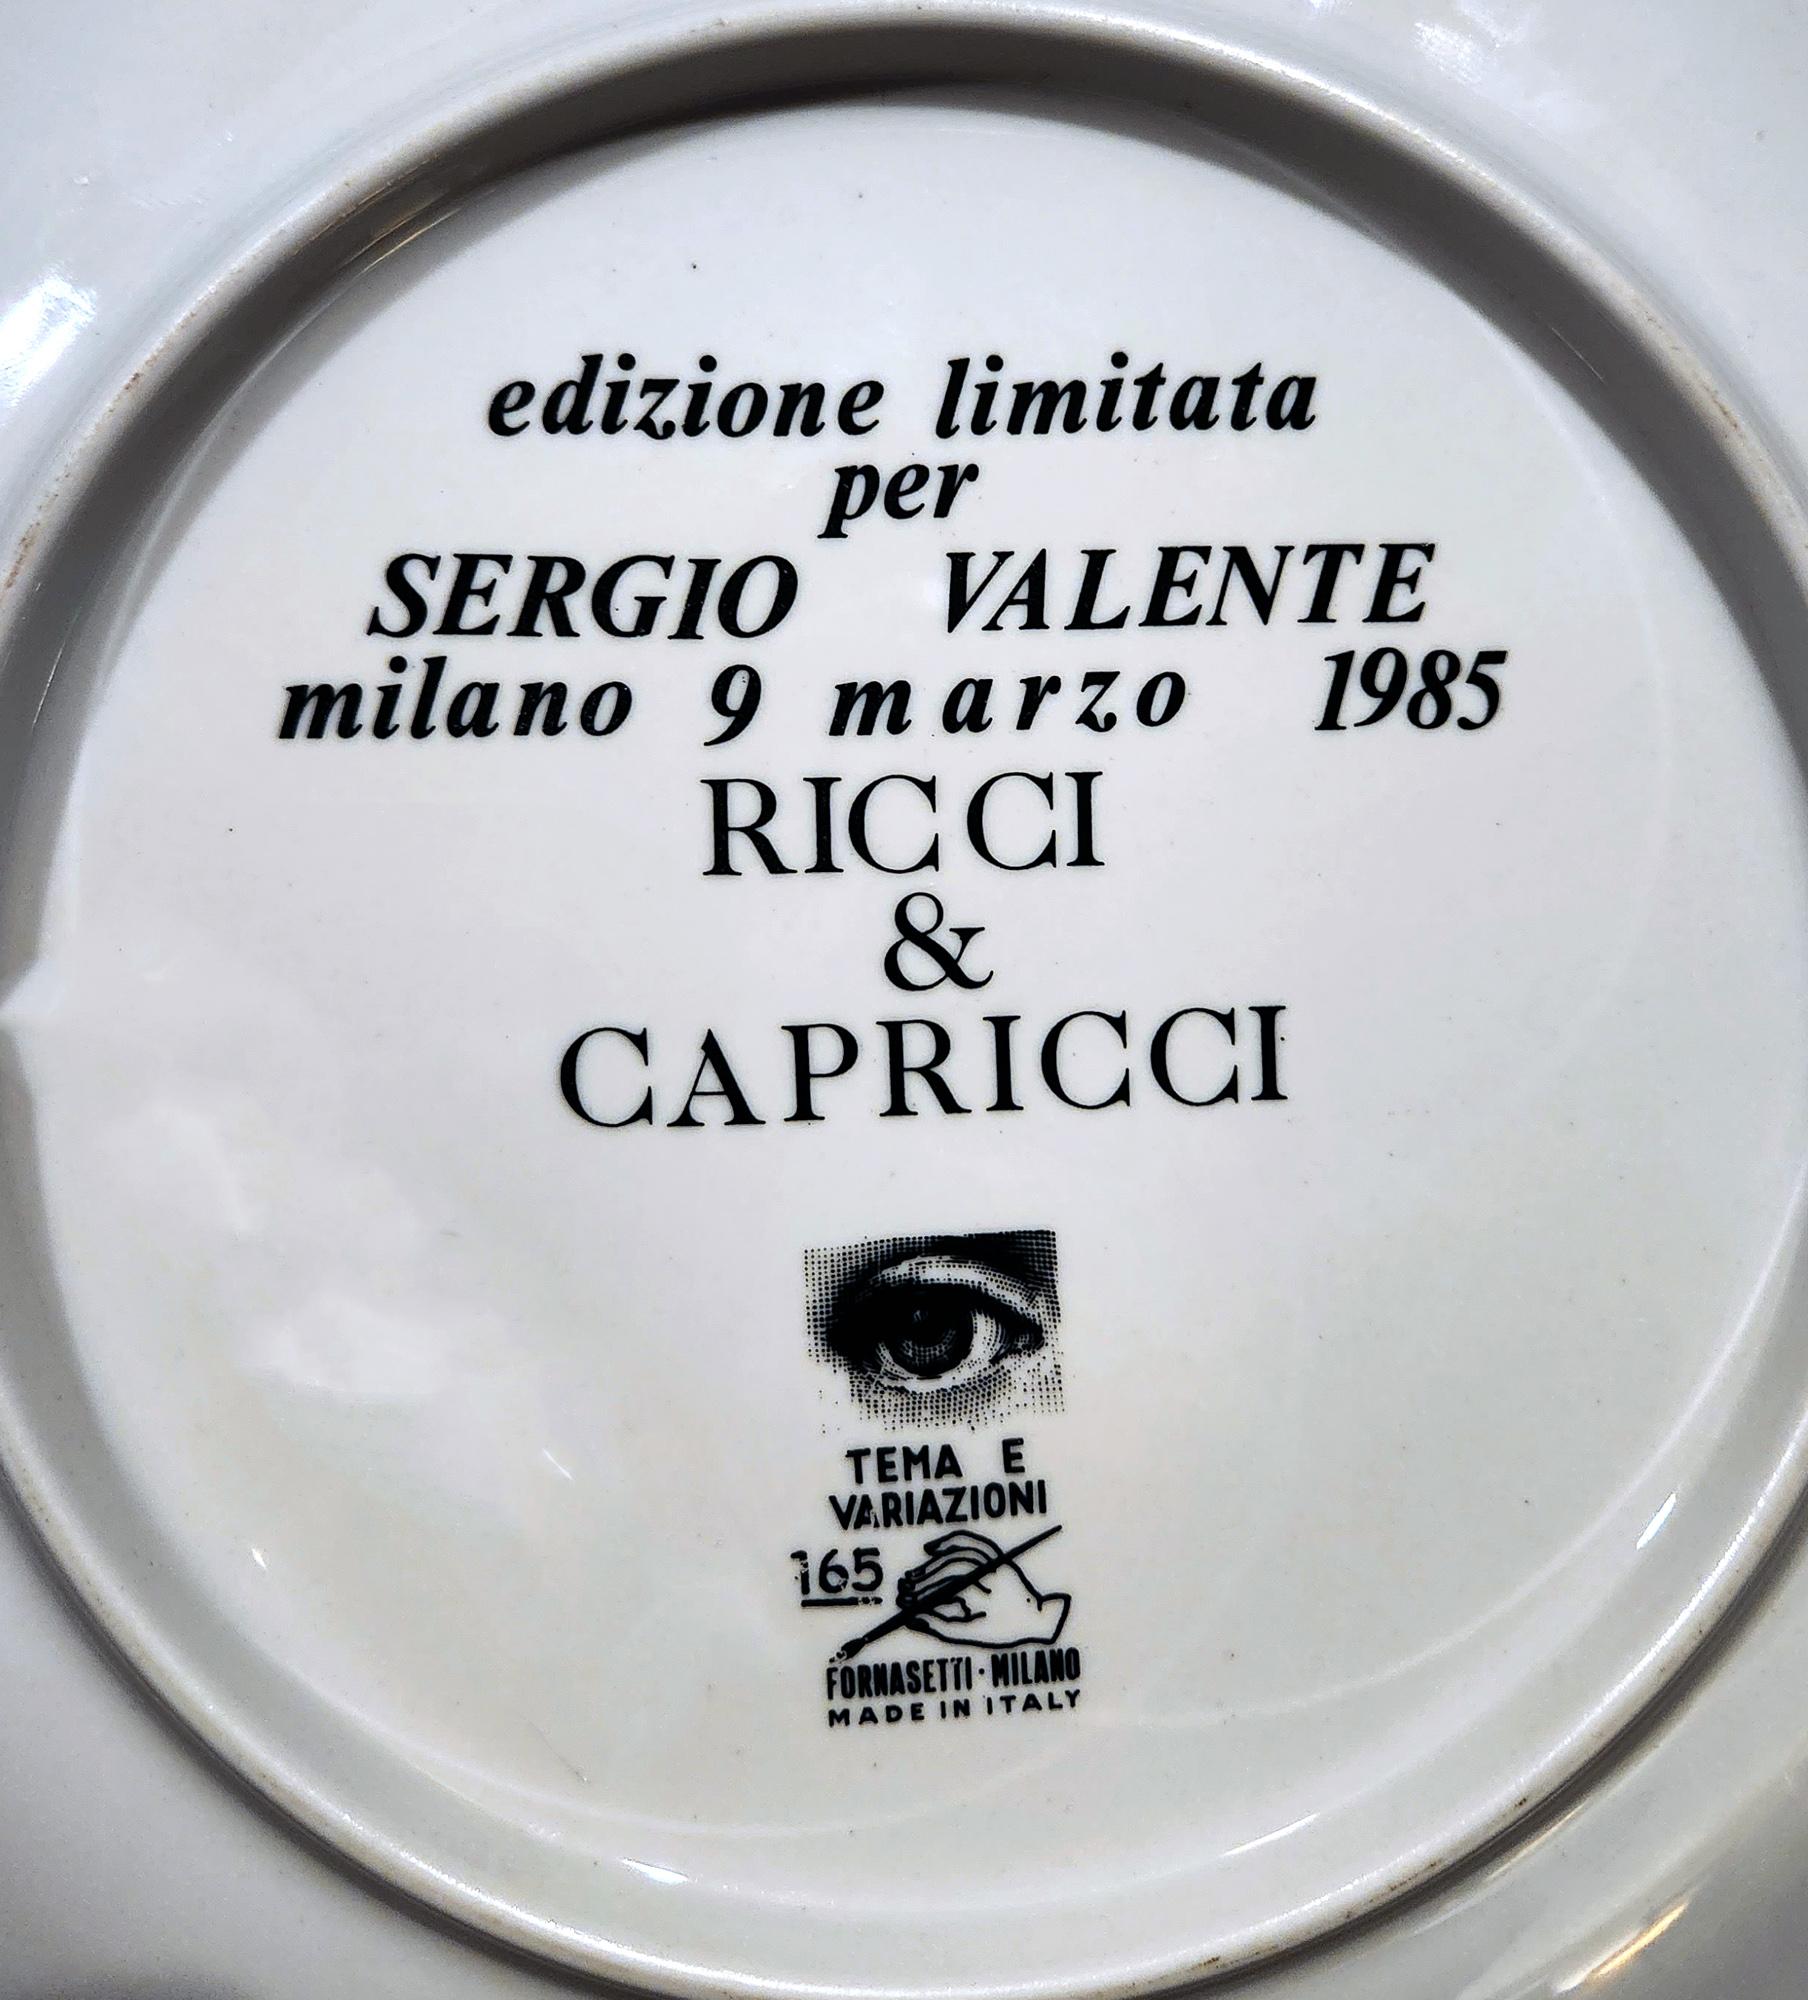 Piero Fornasetti Themes & Variation Porcelain Plate, #165
Special Limited Edition for Sergio Valente,
Dated 9 March 1985

A large Piero Fornasetti plate made as a special edition with pattern number 165- a series of roundels of the face of the